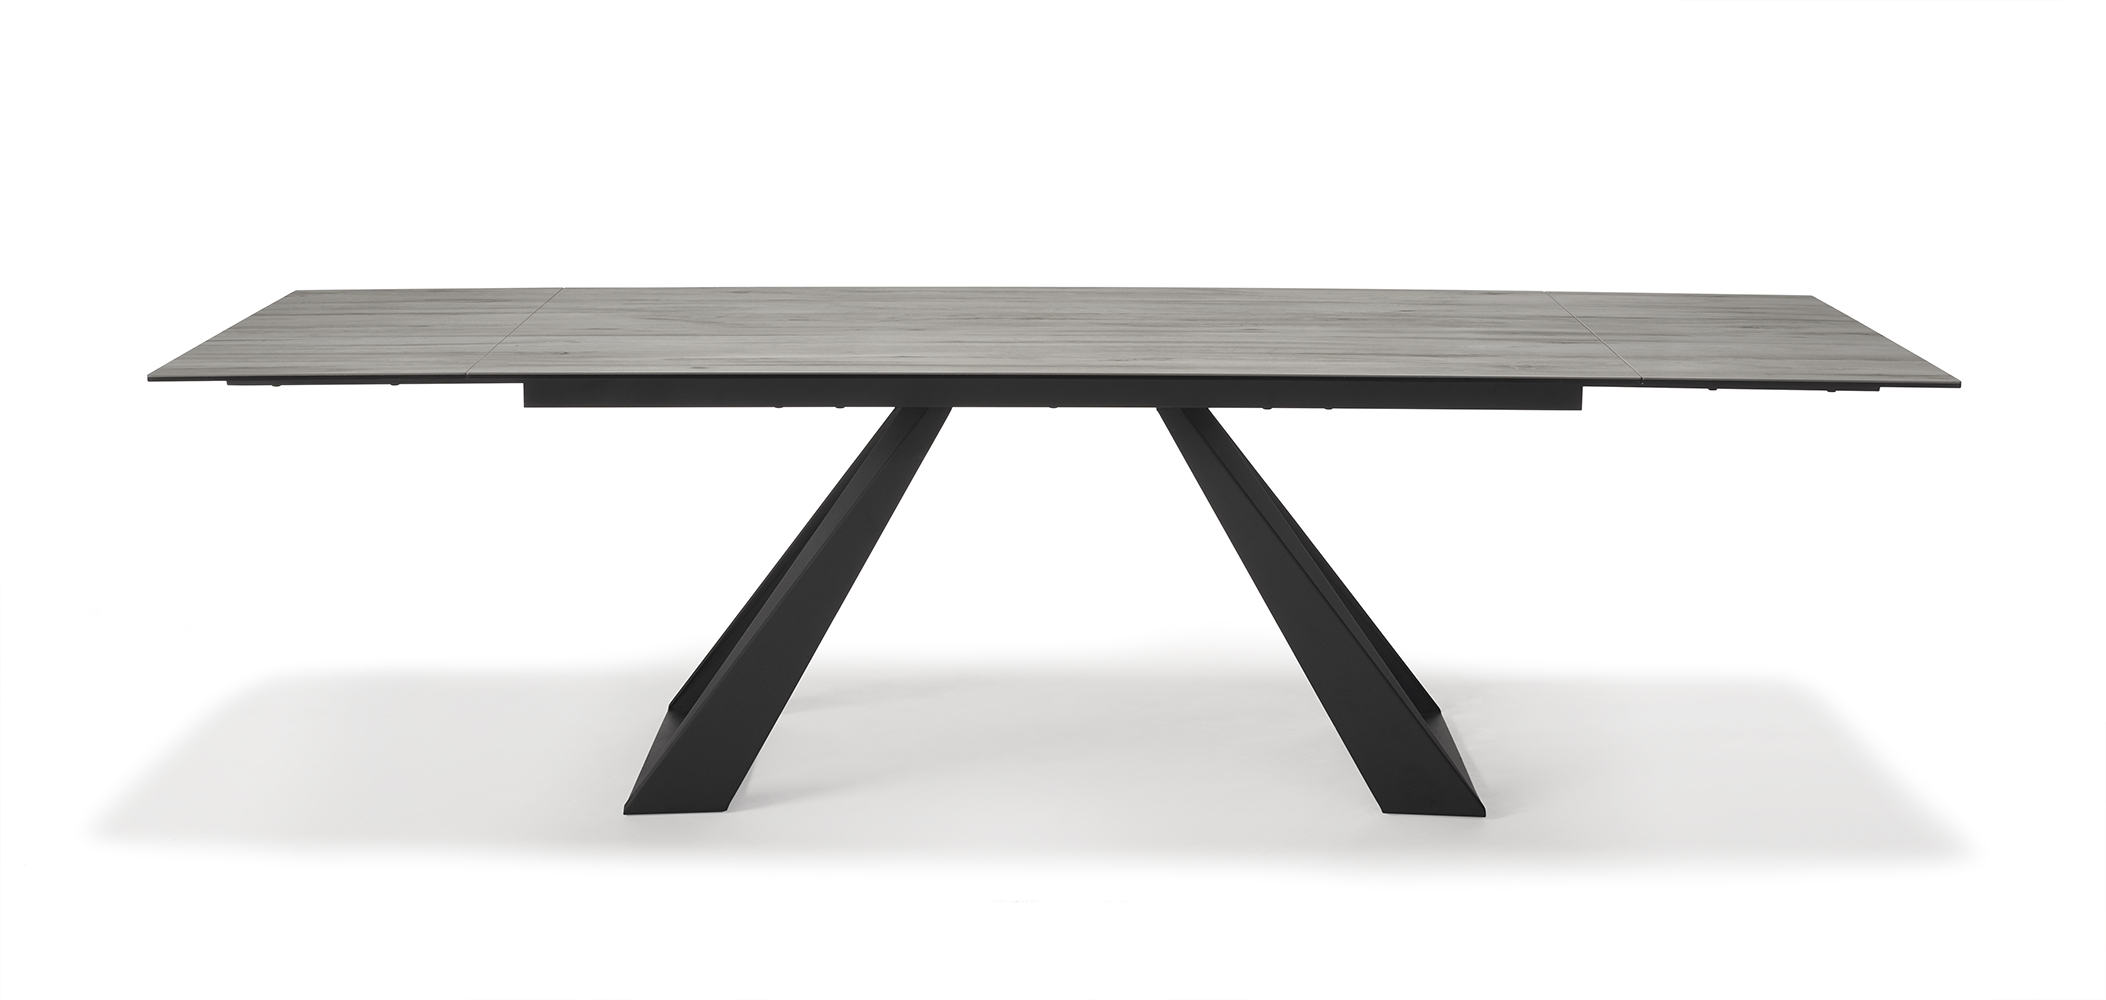 Spartan Dining Table by Kesterport The Spartan Dining Table is part of a sophisticated collection of - Image 2 of 12